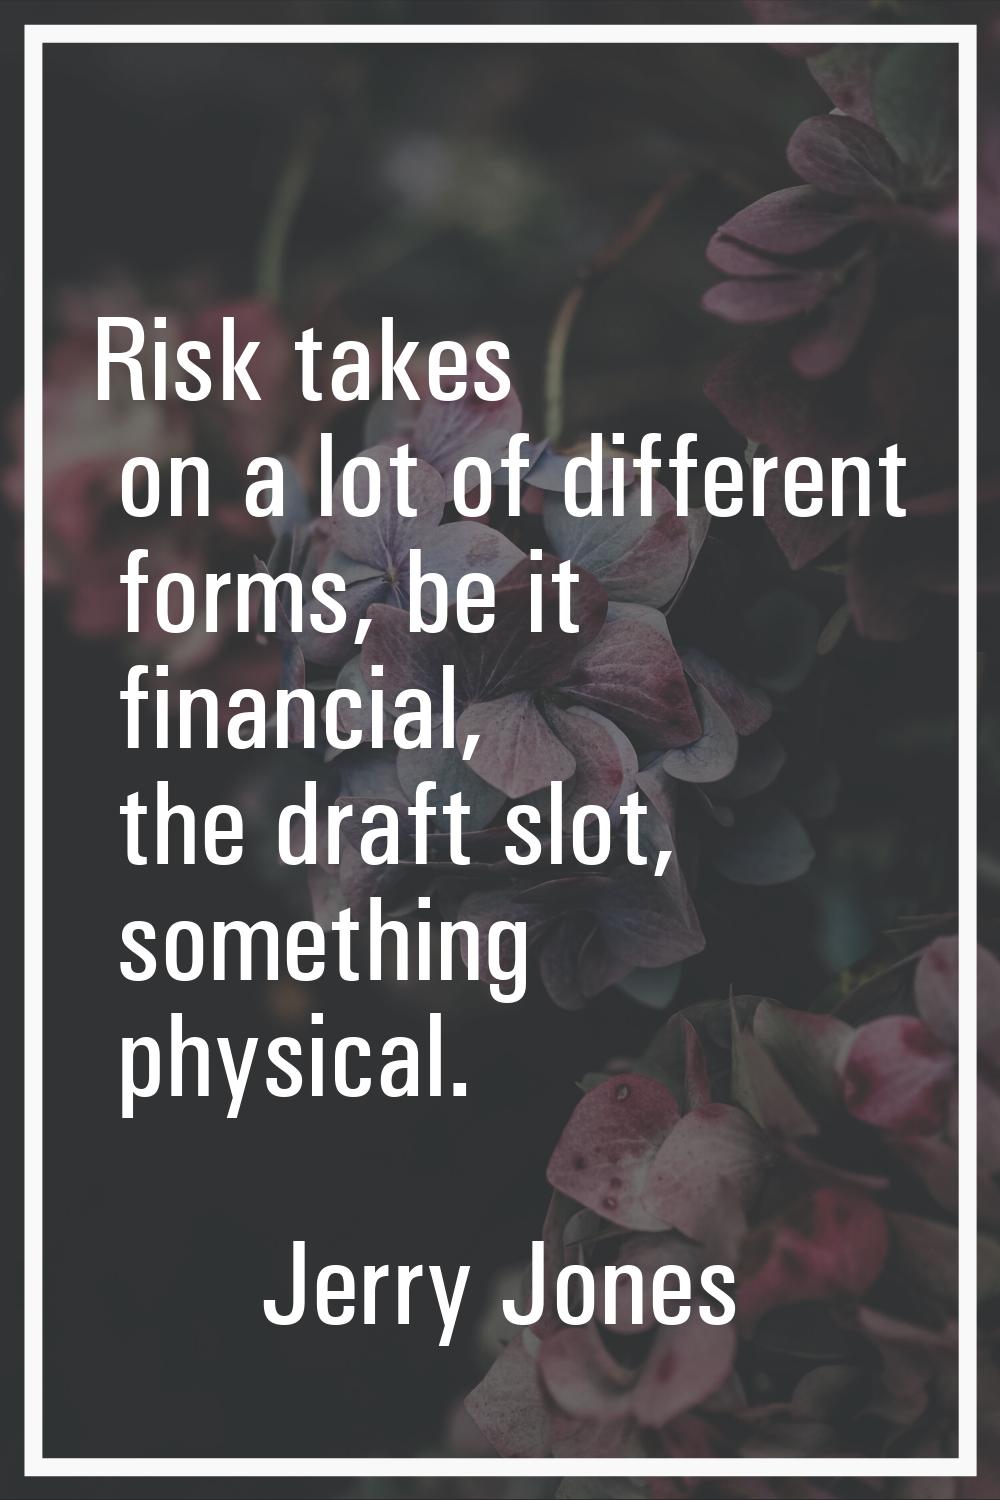 Risk takes on a lot of different forms, be it financial, the draft slot, something physical.